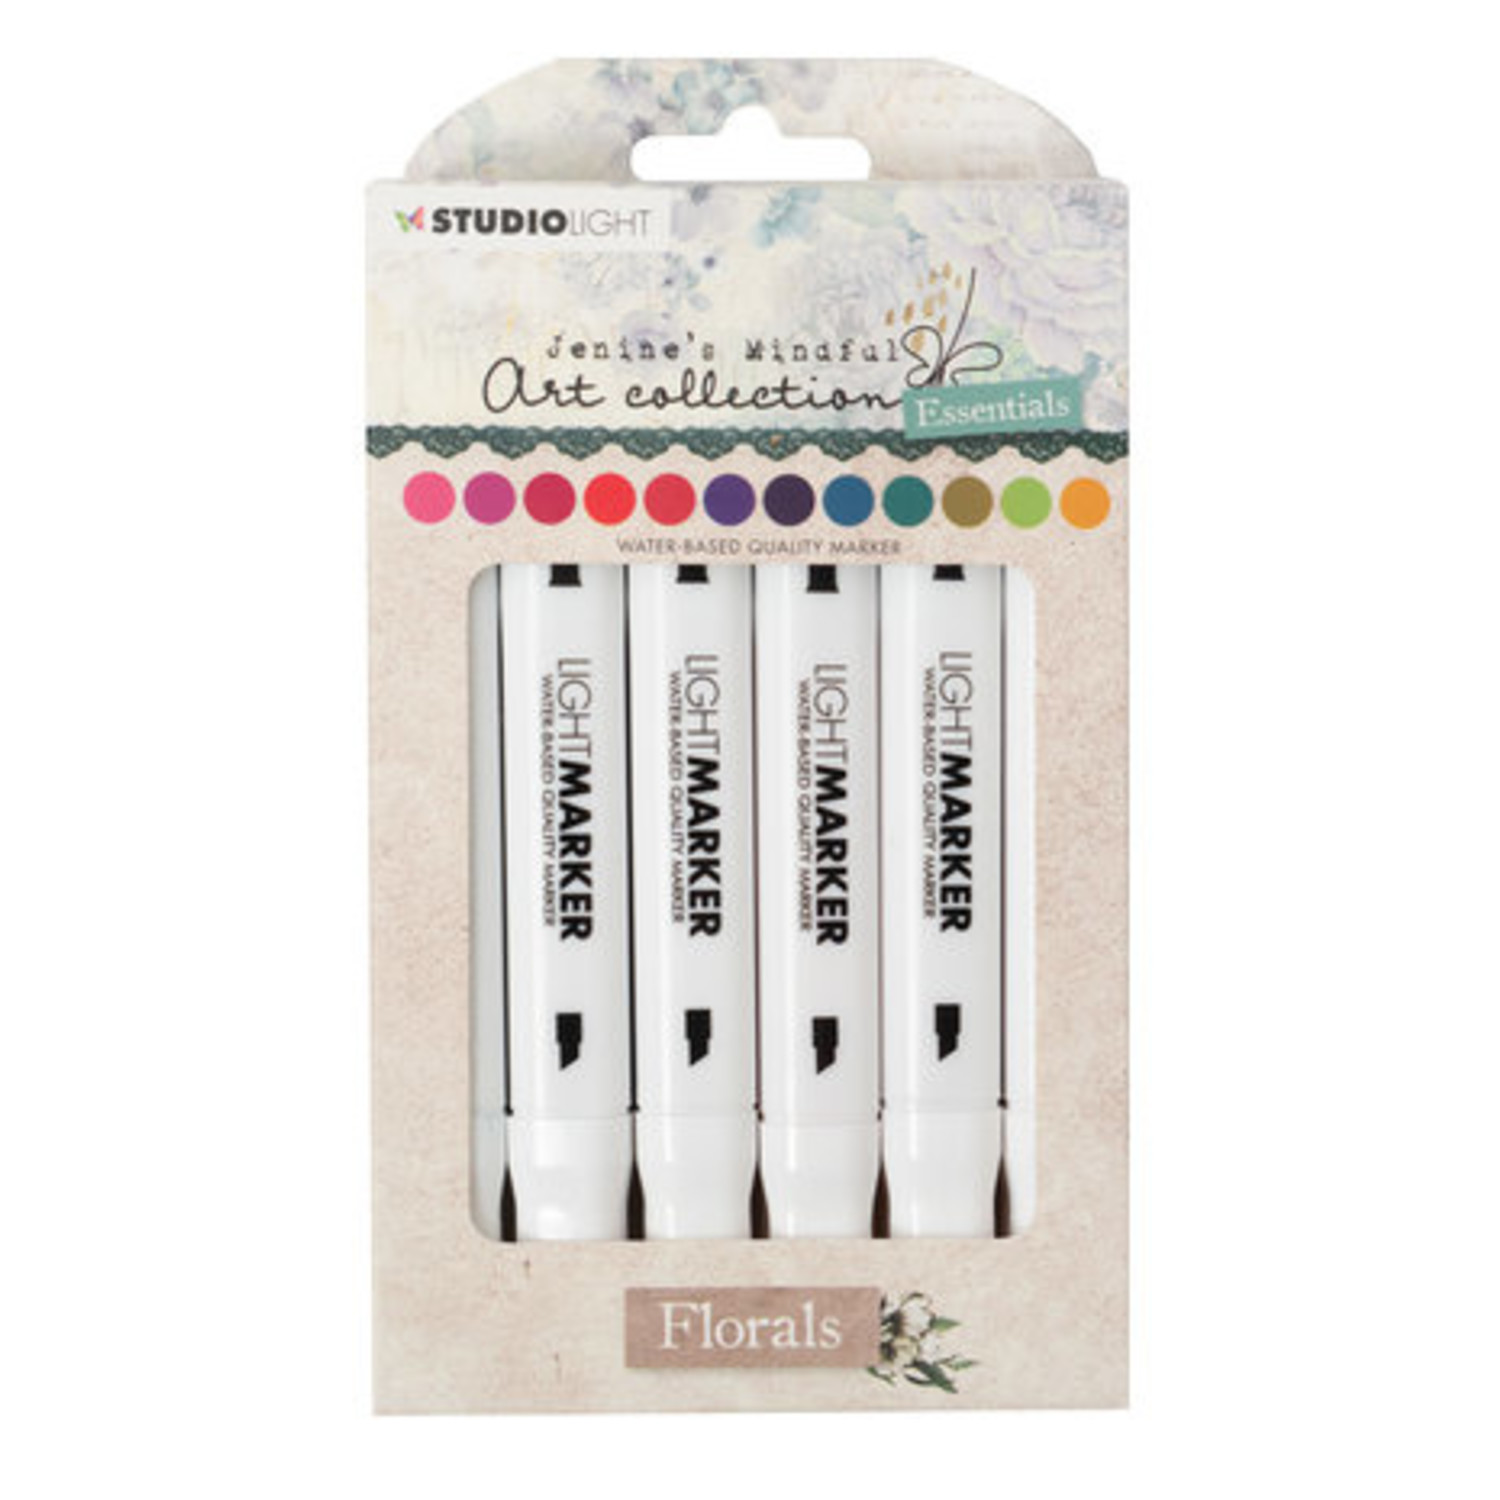 Cricut Infusible Ink Markers in Neon, Basics, and Watercolor Splash Bundle